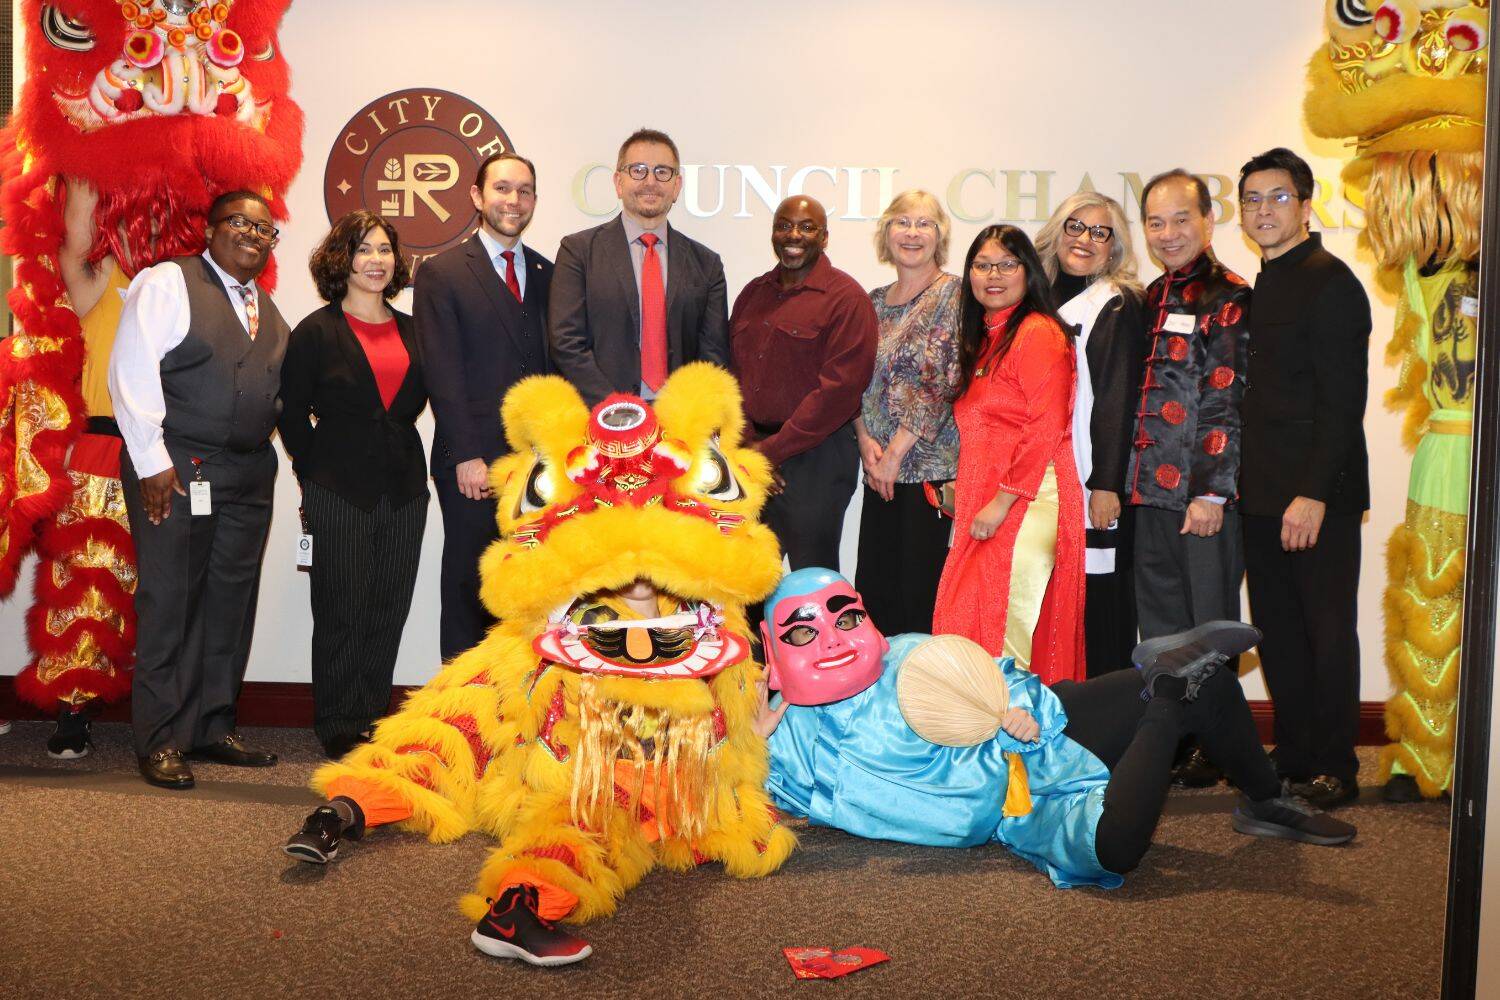 Courtesy of City of Renton
Renton City Council members pose with Lunar New Year dragons.